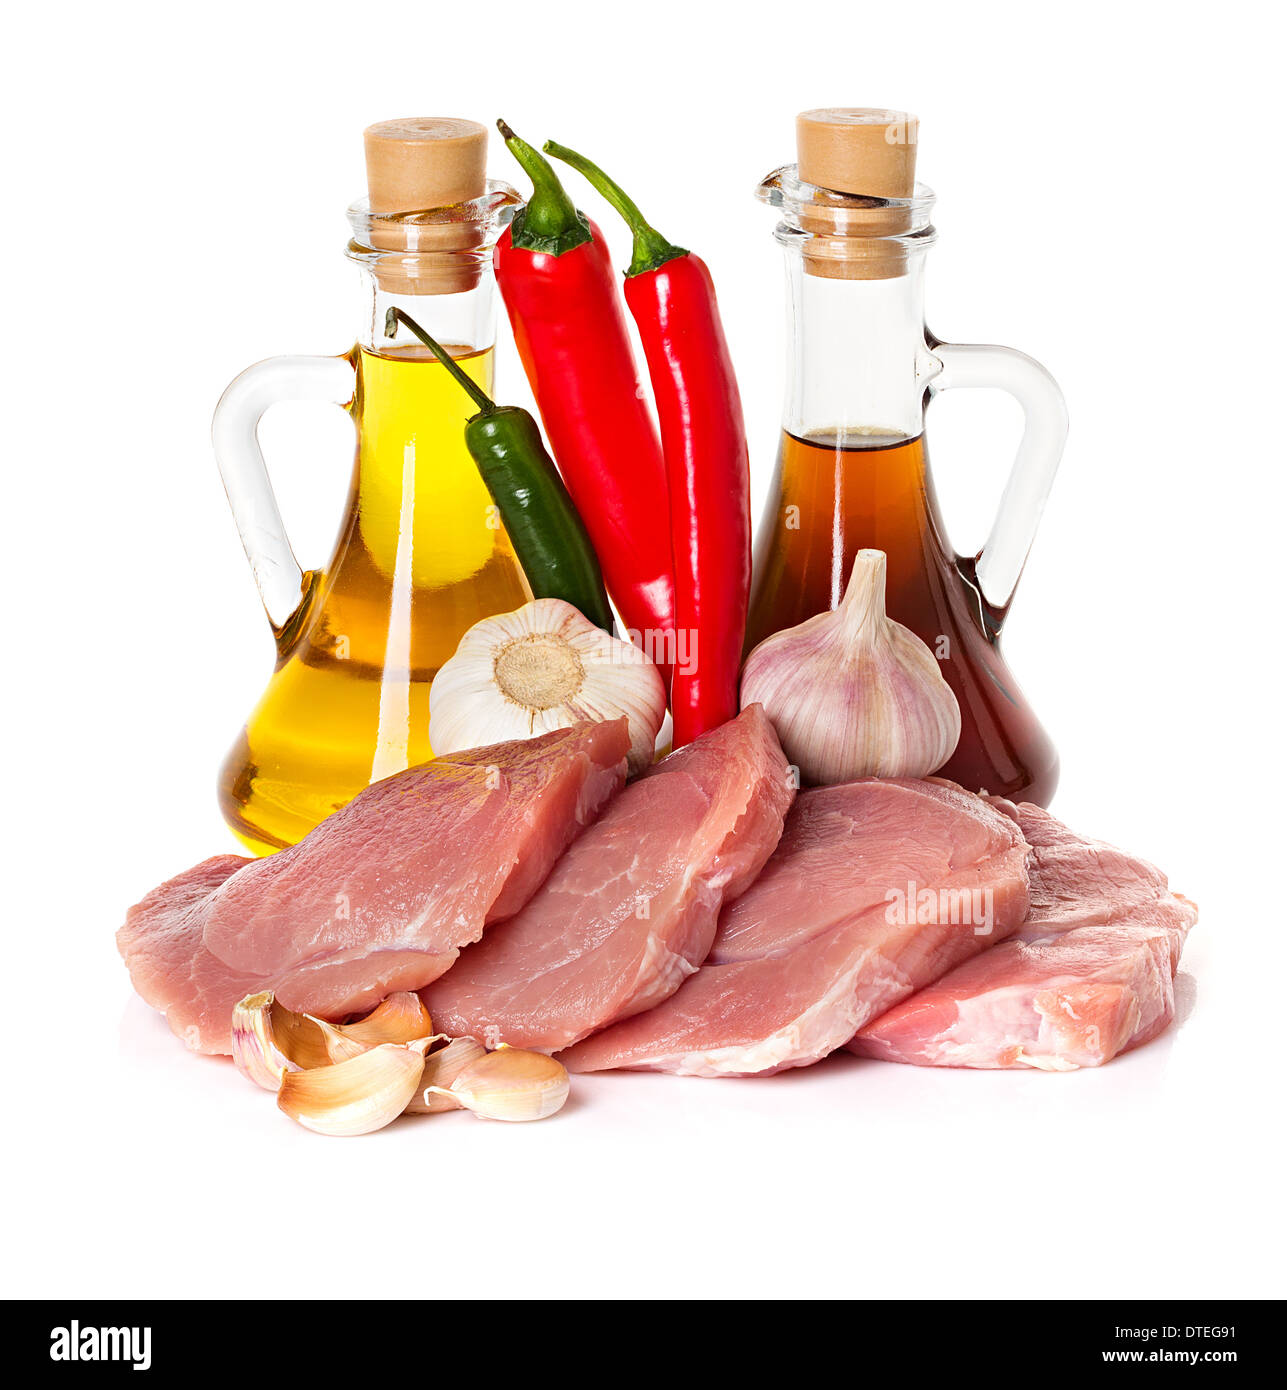 Raw meat pork spices and vegetables Stock Photo